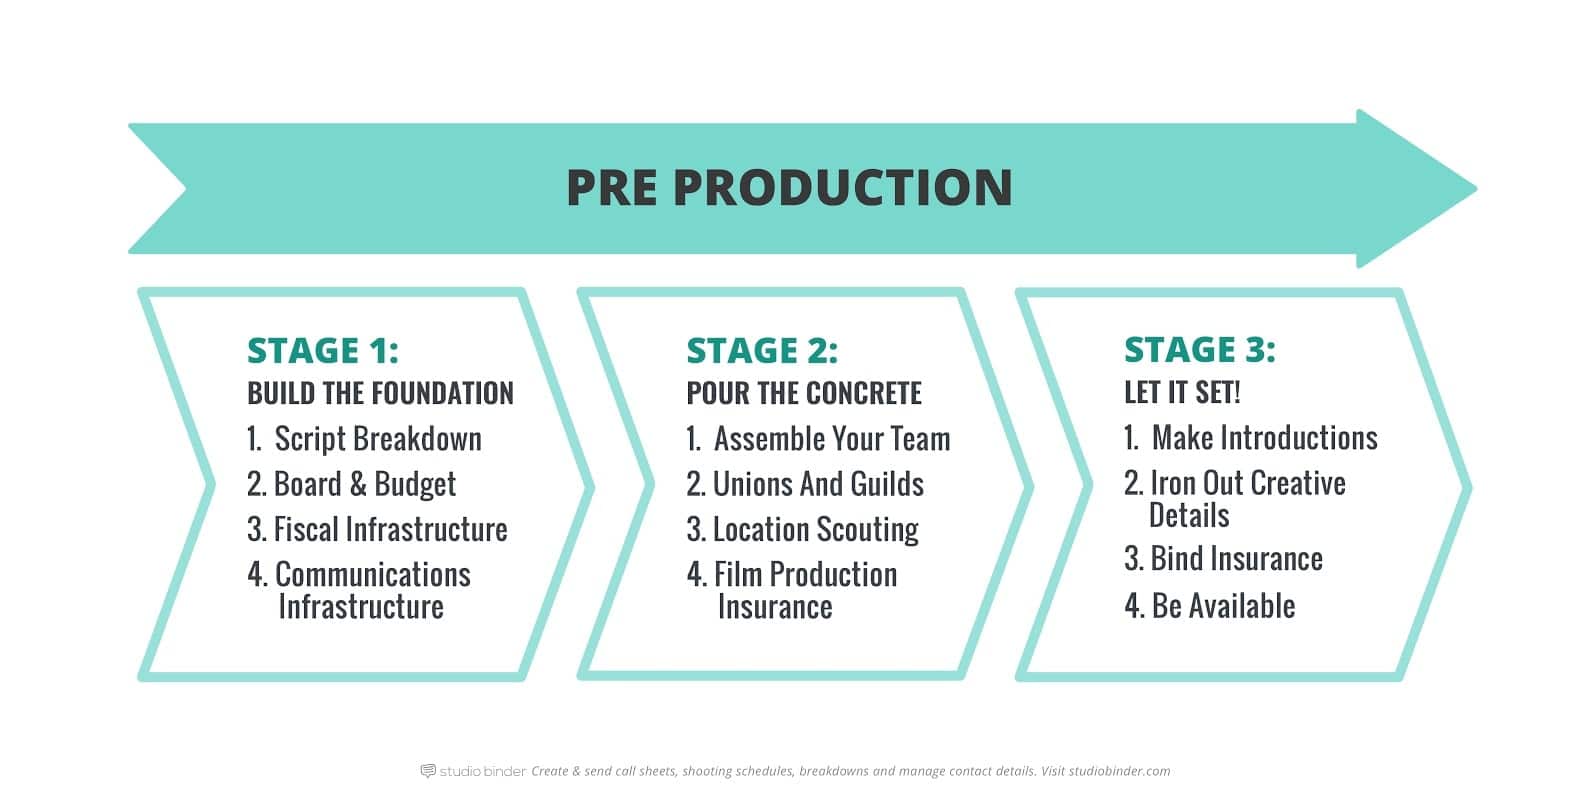 The-Pre-Production-Process-Explained-Infographic-StudioBinder